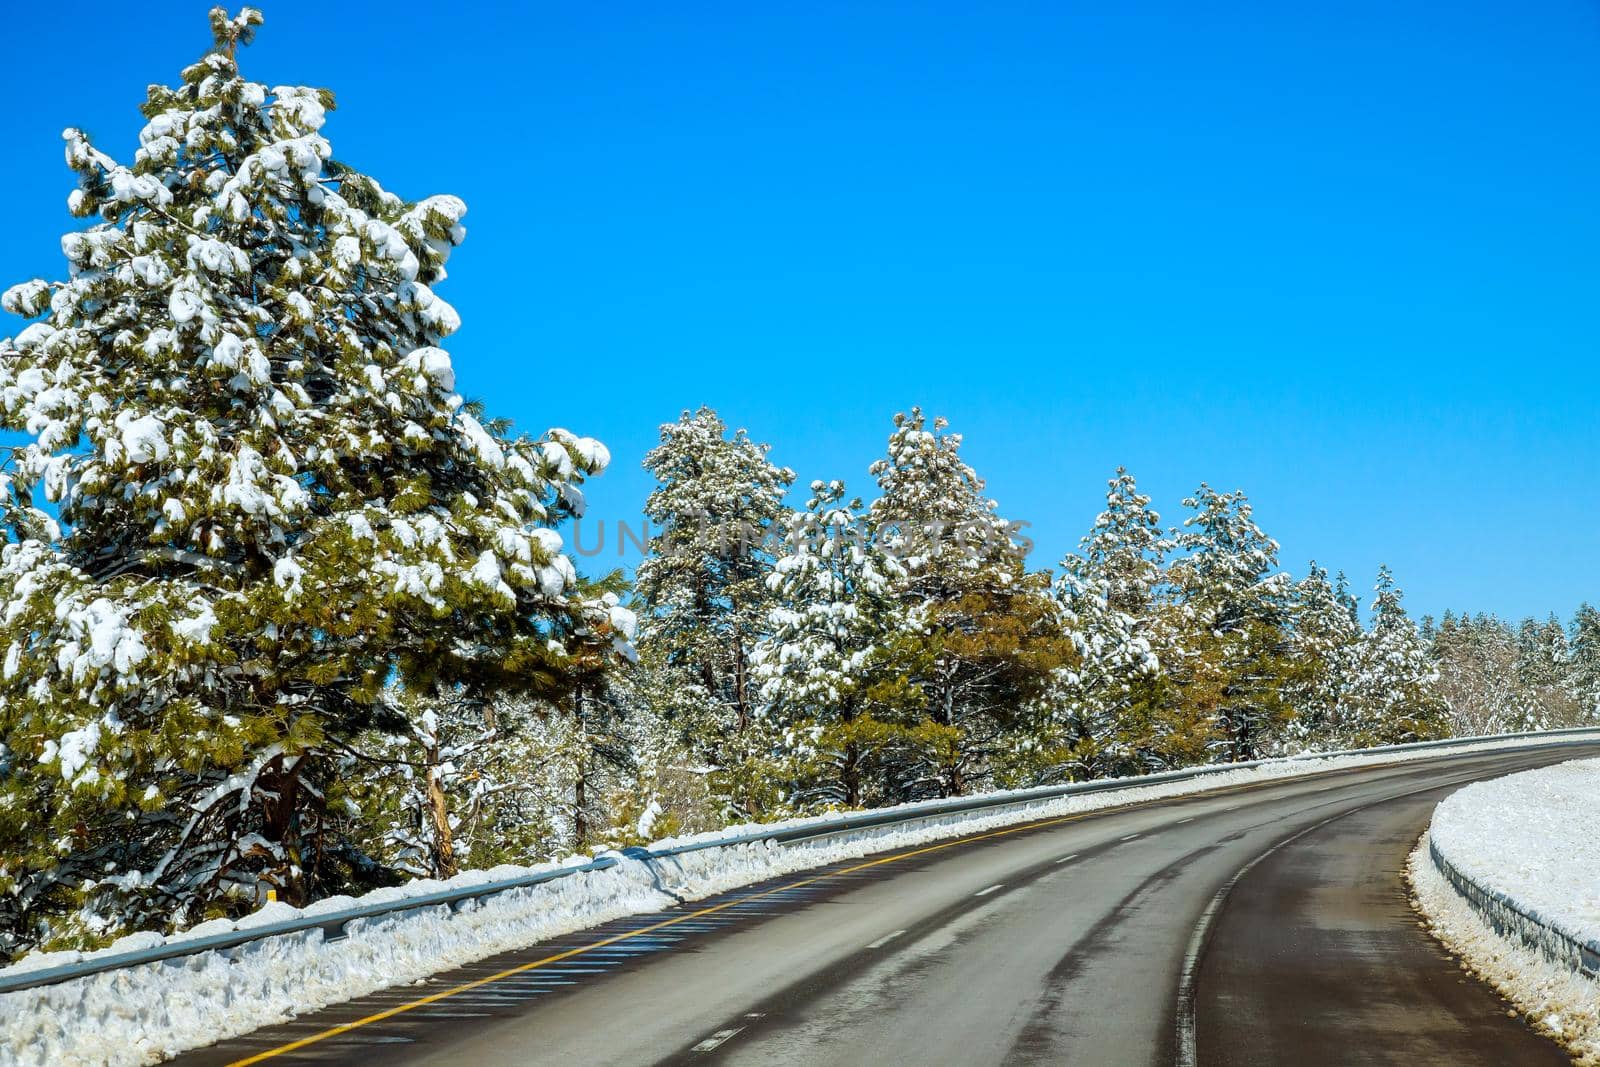 Winter road trees with the mountain snow landscape in Arizona US